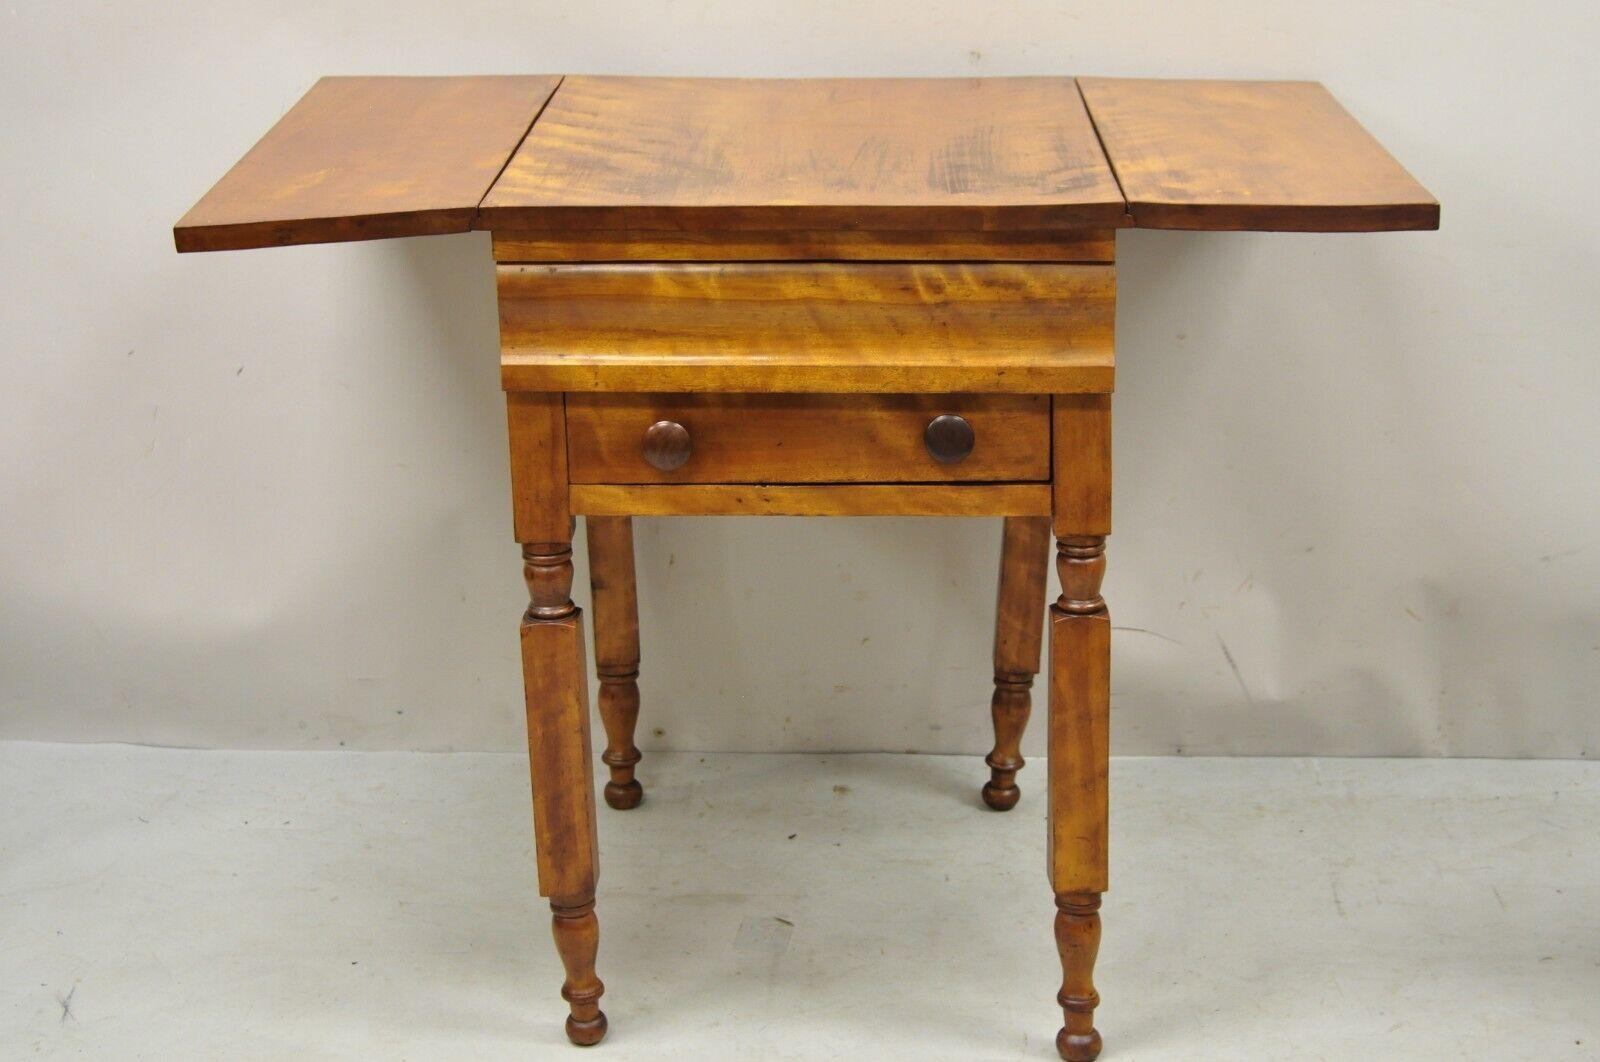 Antique Victorian chestnut drop leaf work table side table with 2 drawers. Item features drop leaf sides, twin carved legs, 2 dovetailed drawers, very nice antique item. Circa 19th Century. Measurements: 28